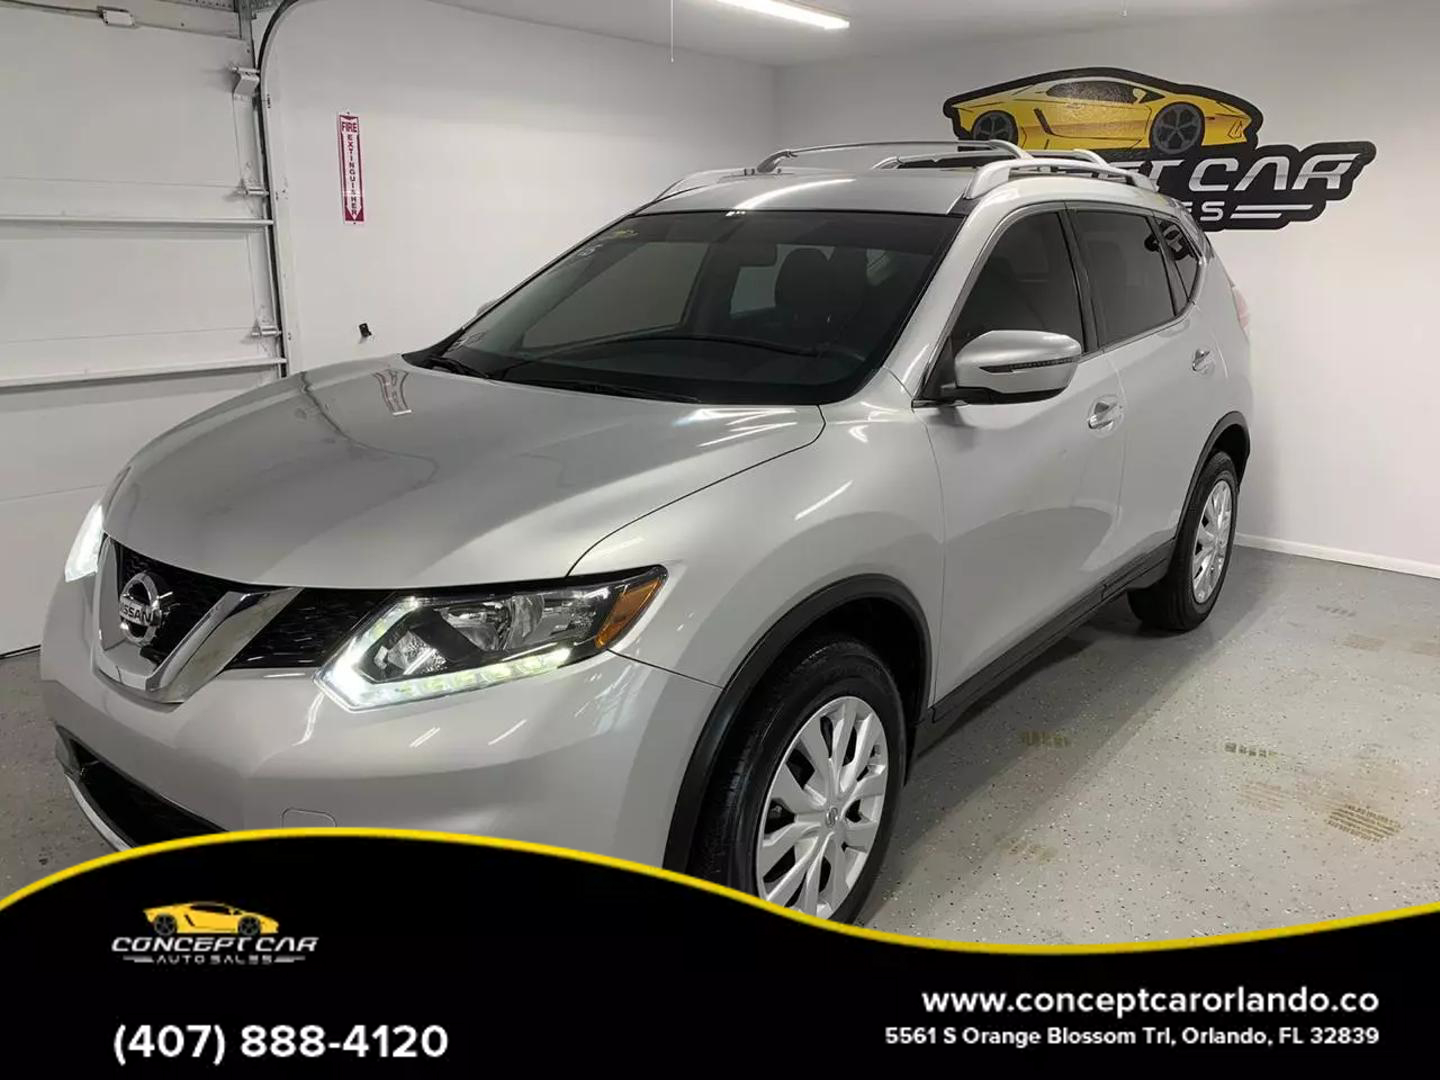 USED NISSAN ROGUE 2016 for sale in Orlando, FL Concept Car Auto Sales LLC